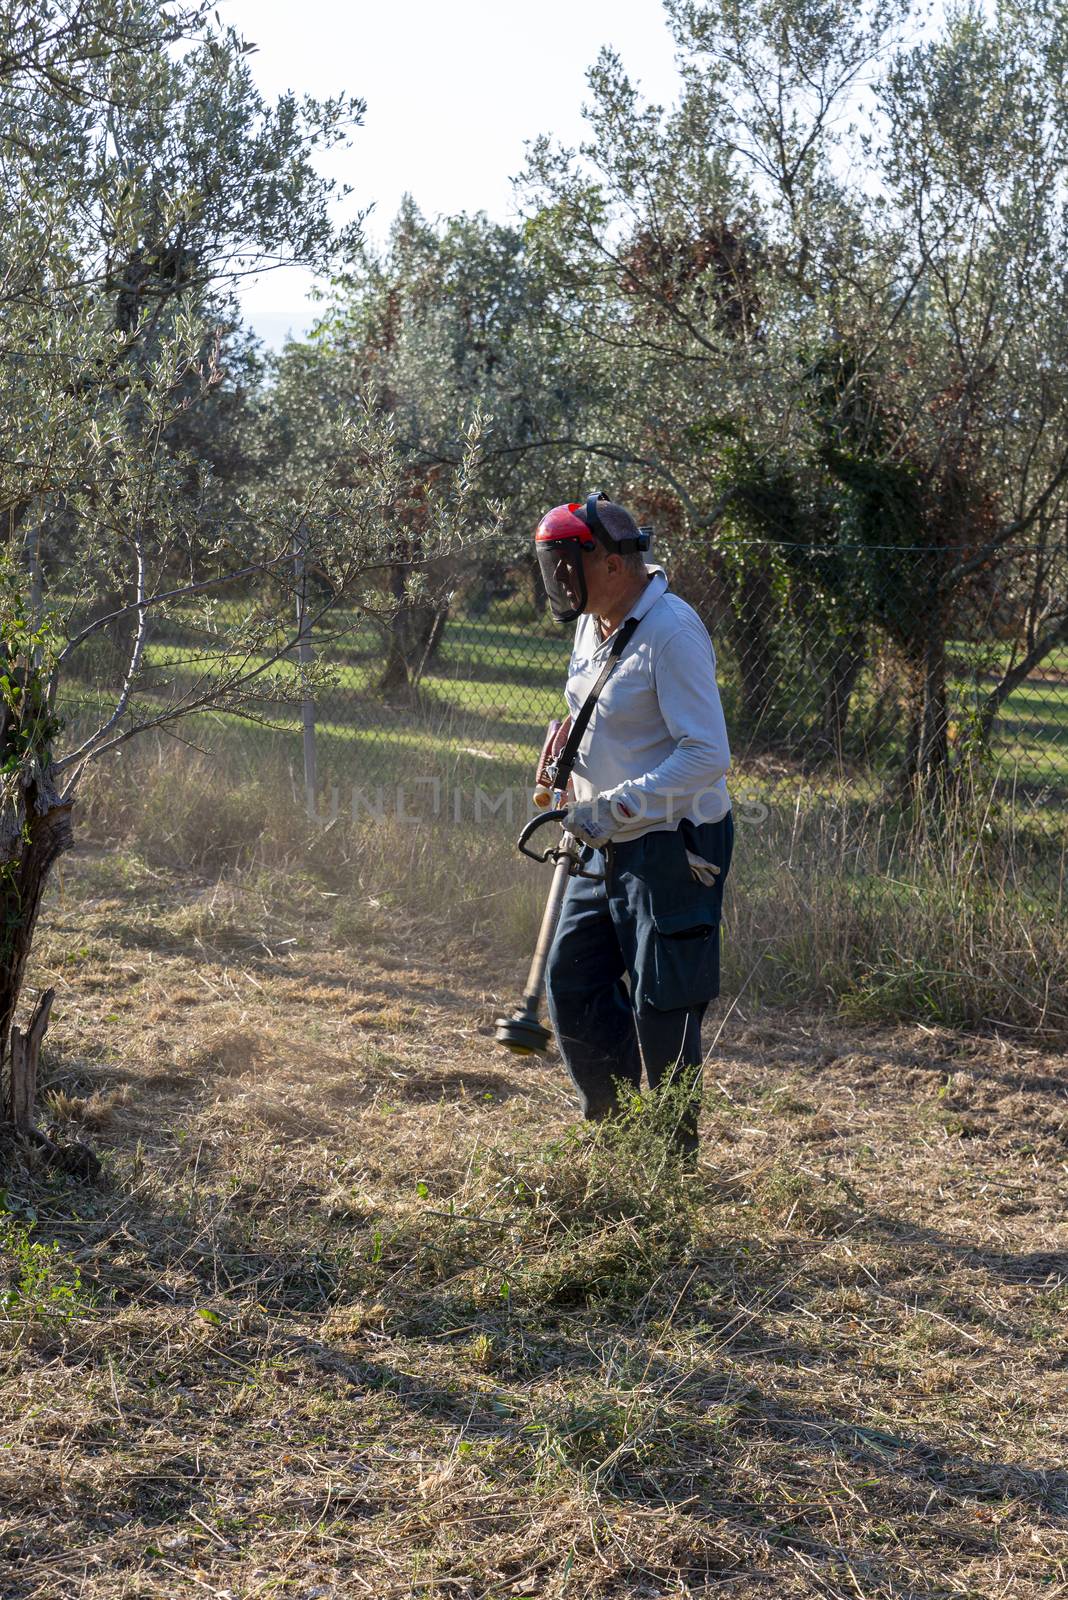 cleaning with brush cutter during the chopping of olive fields